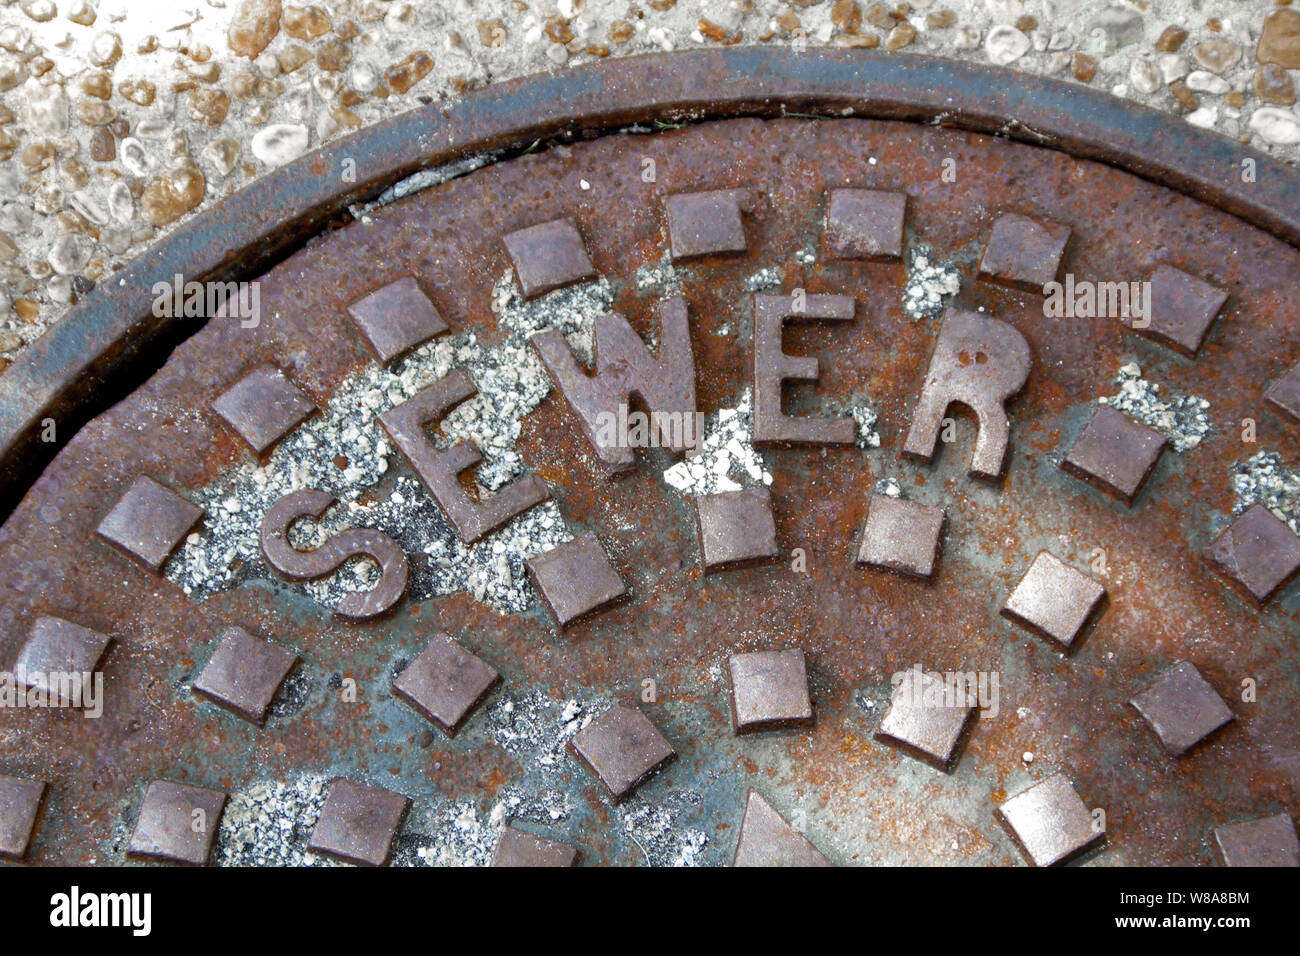 A rusty manhole cover with sewer displayed on it. Stock Photo